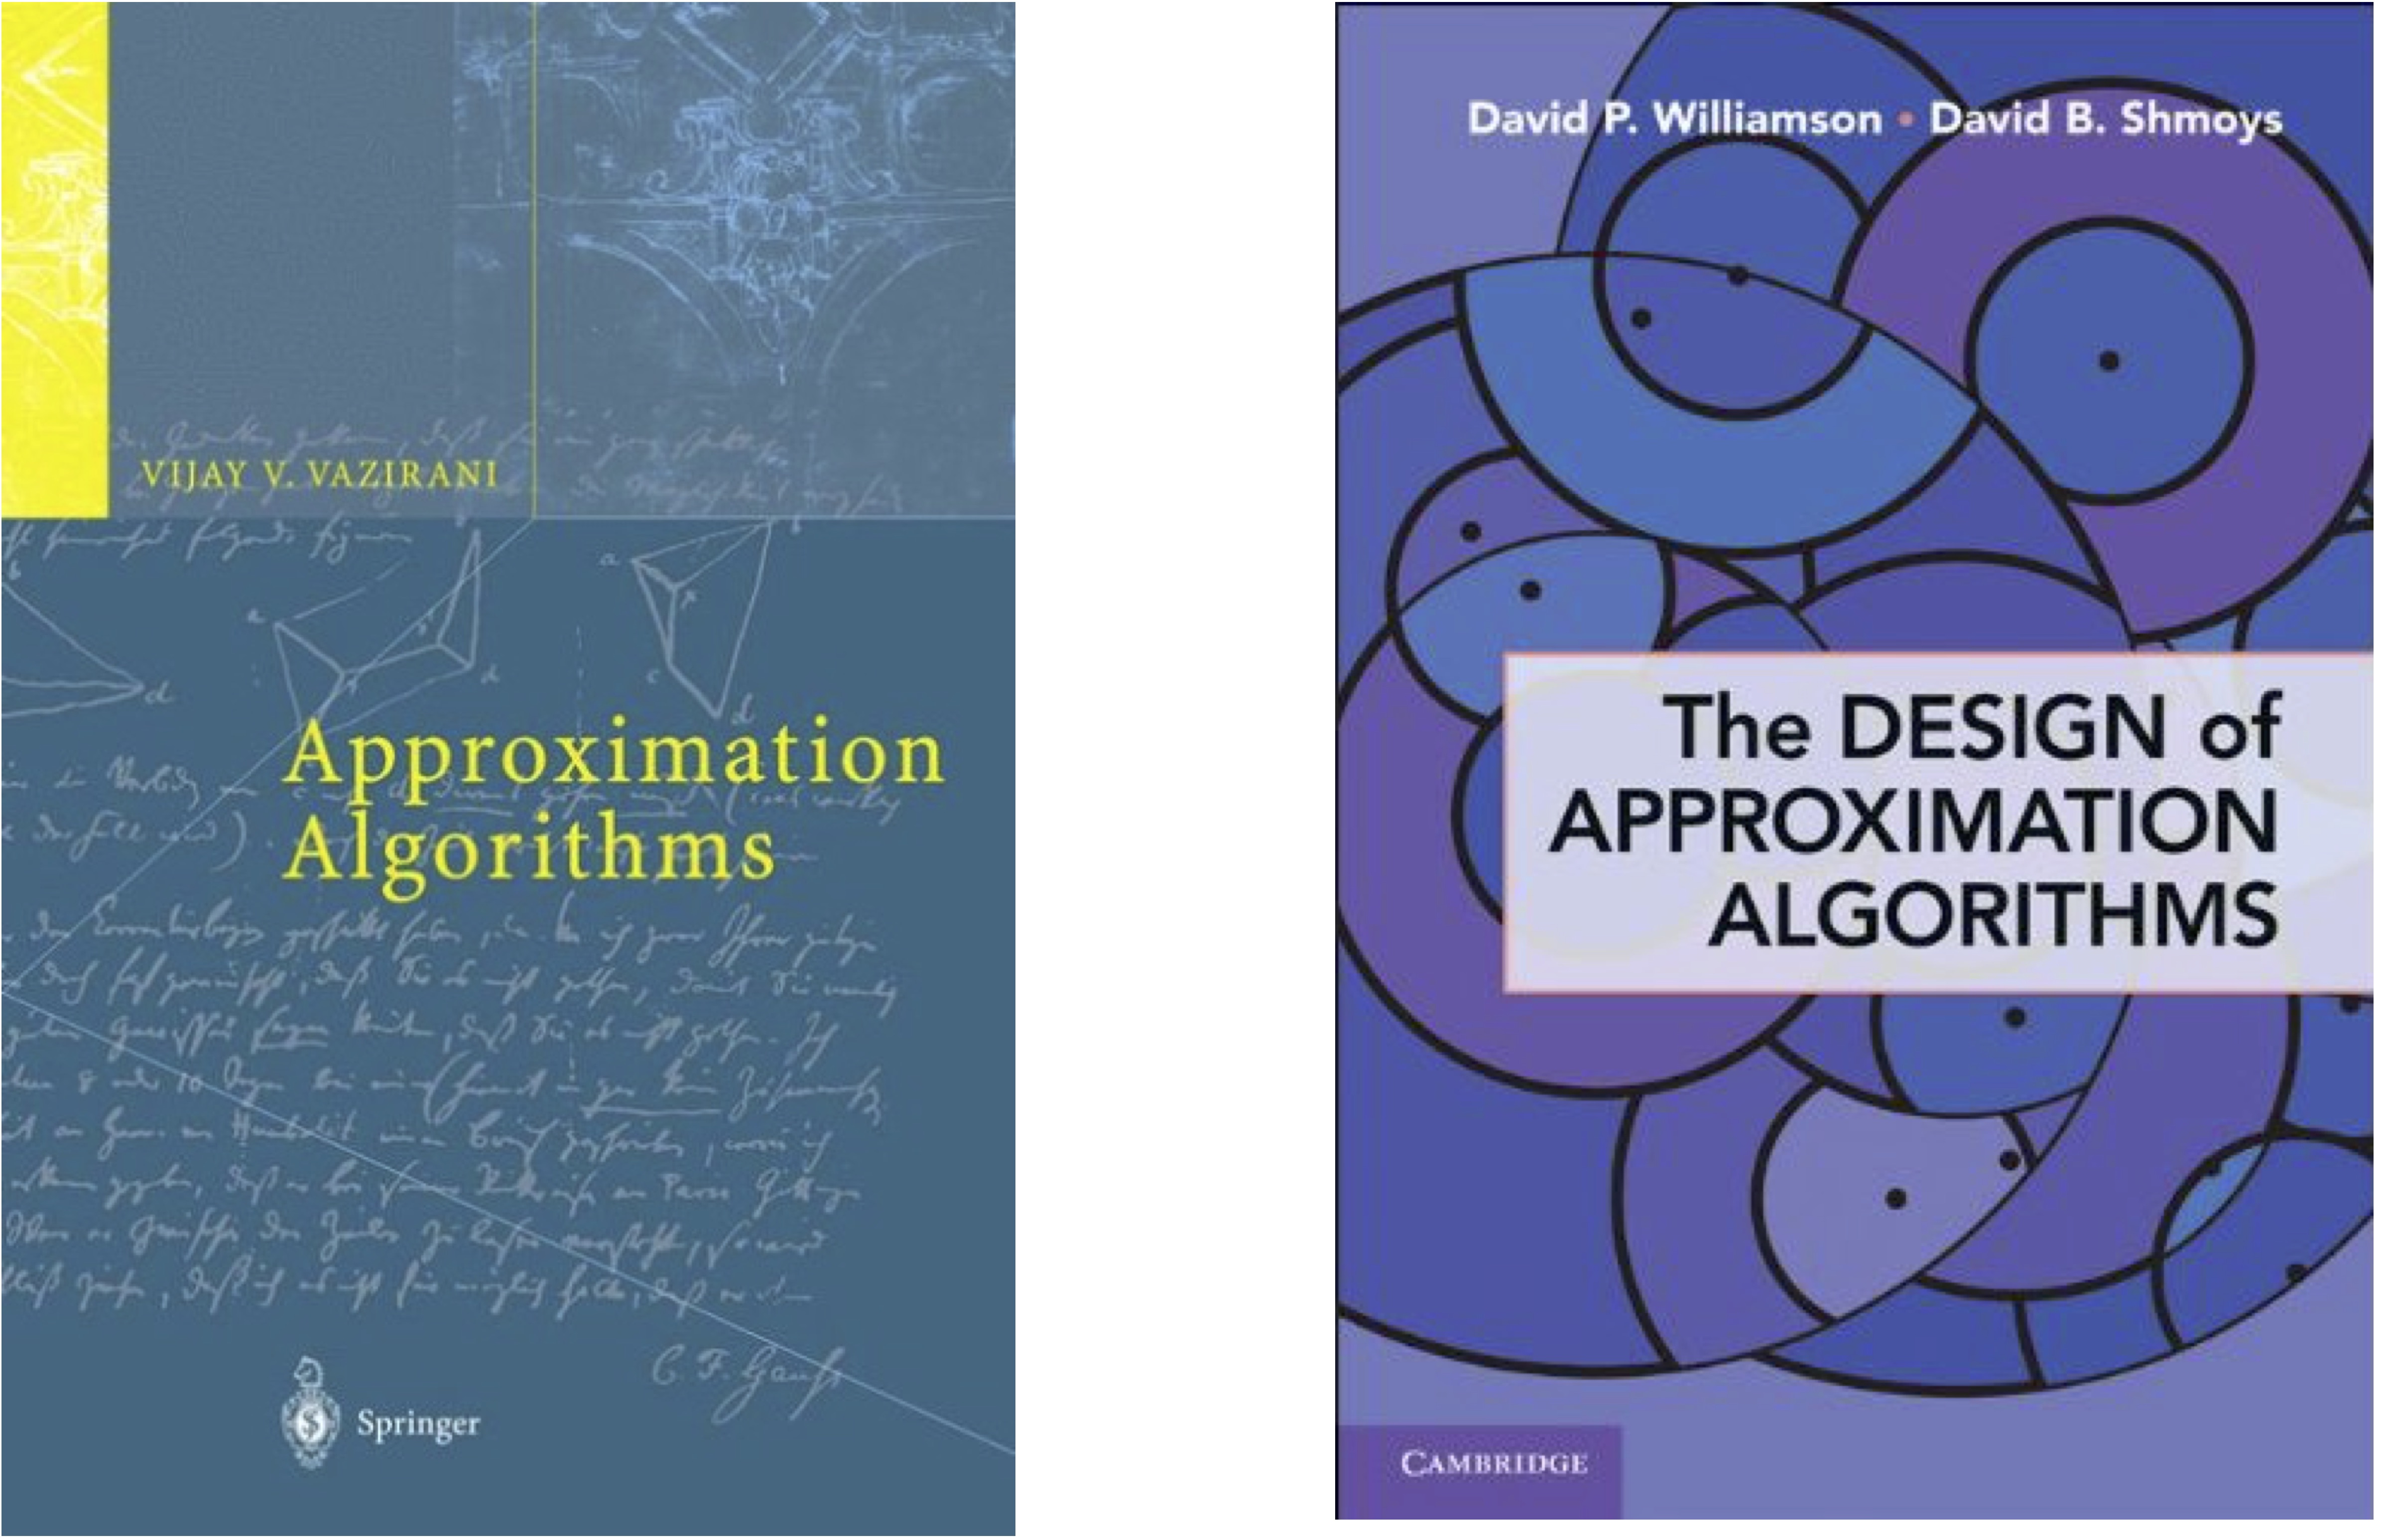 The books on Approximation Algorithms